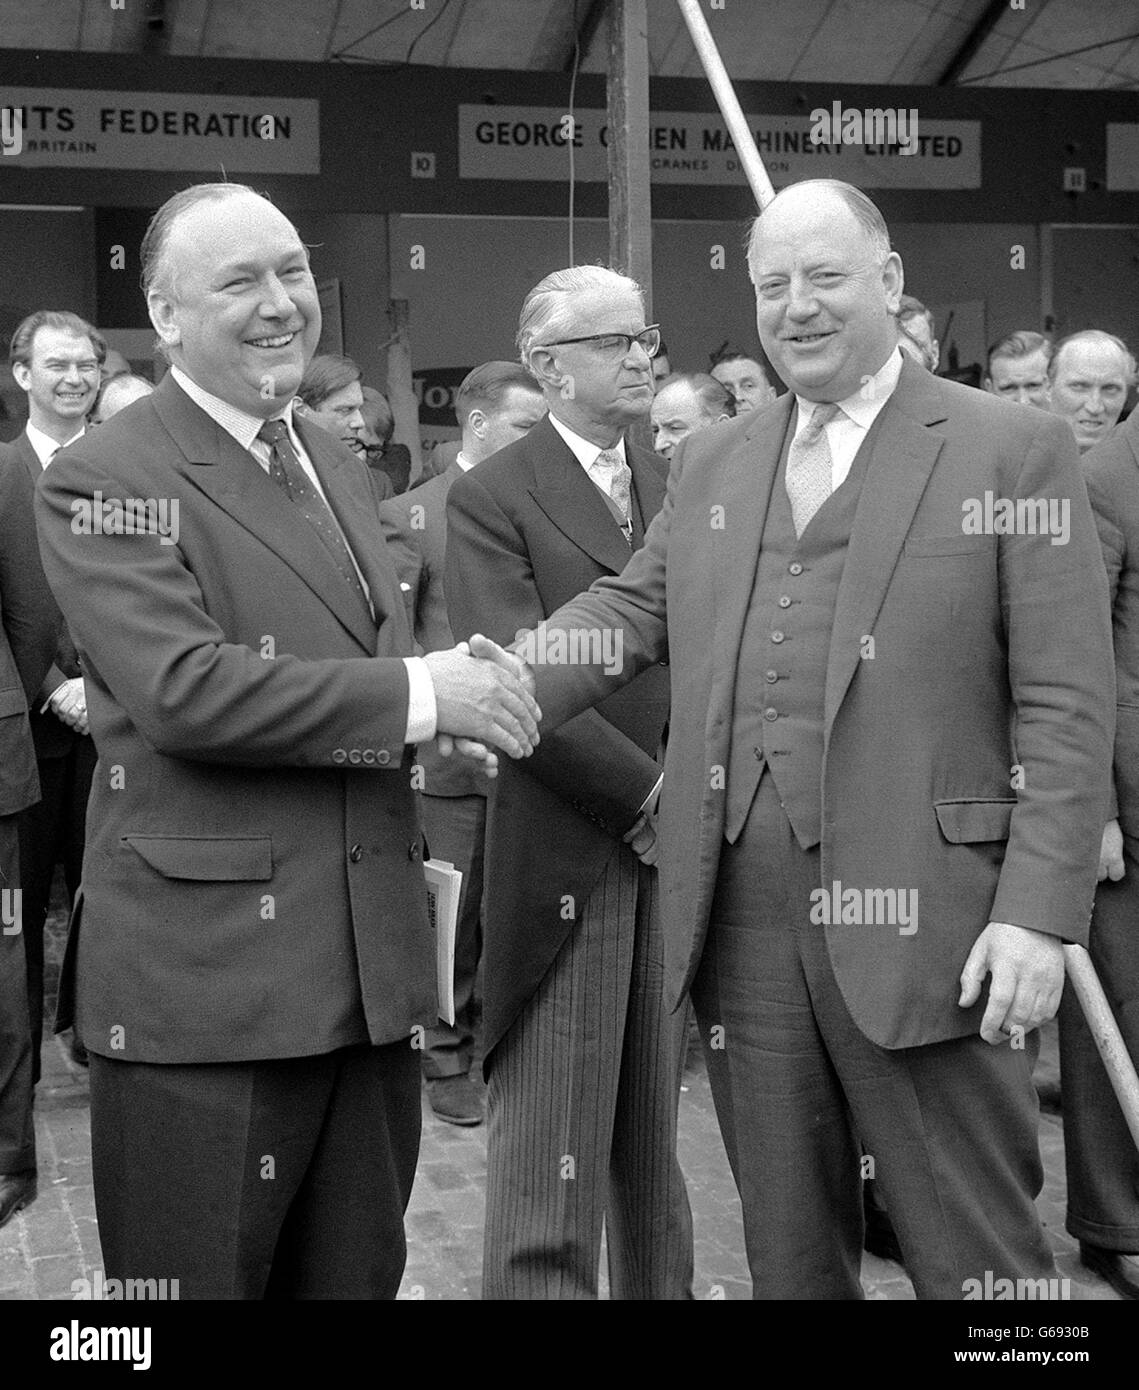 Dr Richard Beeching, (right) woh will soon be leaving his post as Chairman of the british Railways Board, has his hand shaken by Lord Robens, Chairman of the Natinla coal Board and thanked for his service to the railways at Marlybone, London. The occasion was the opening of the Second Coal Handling Exhibition. Stock Photo